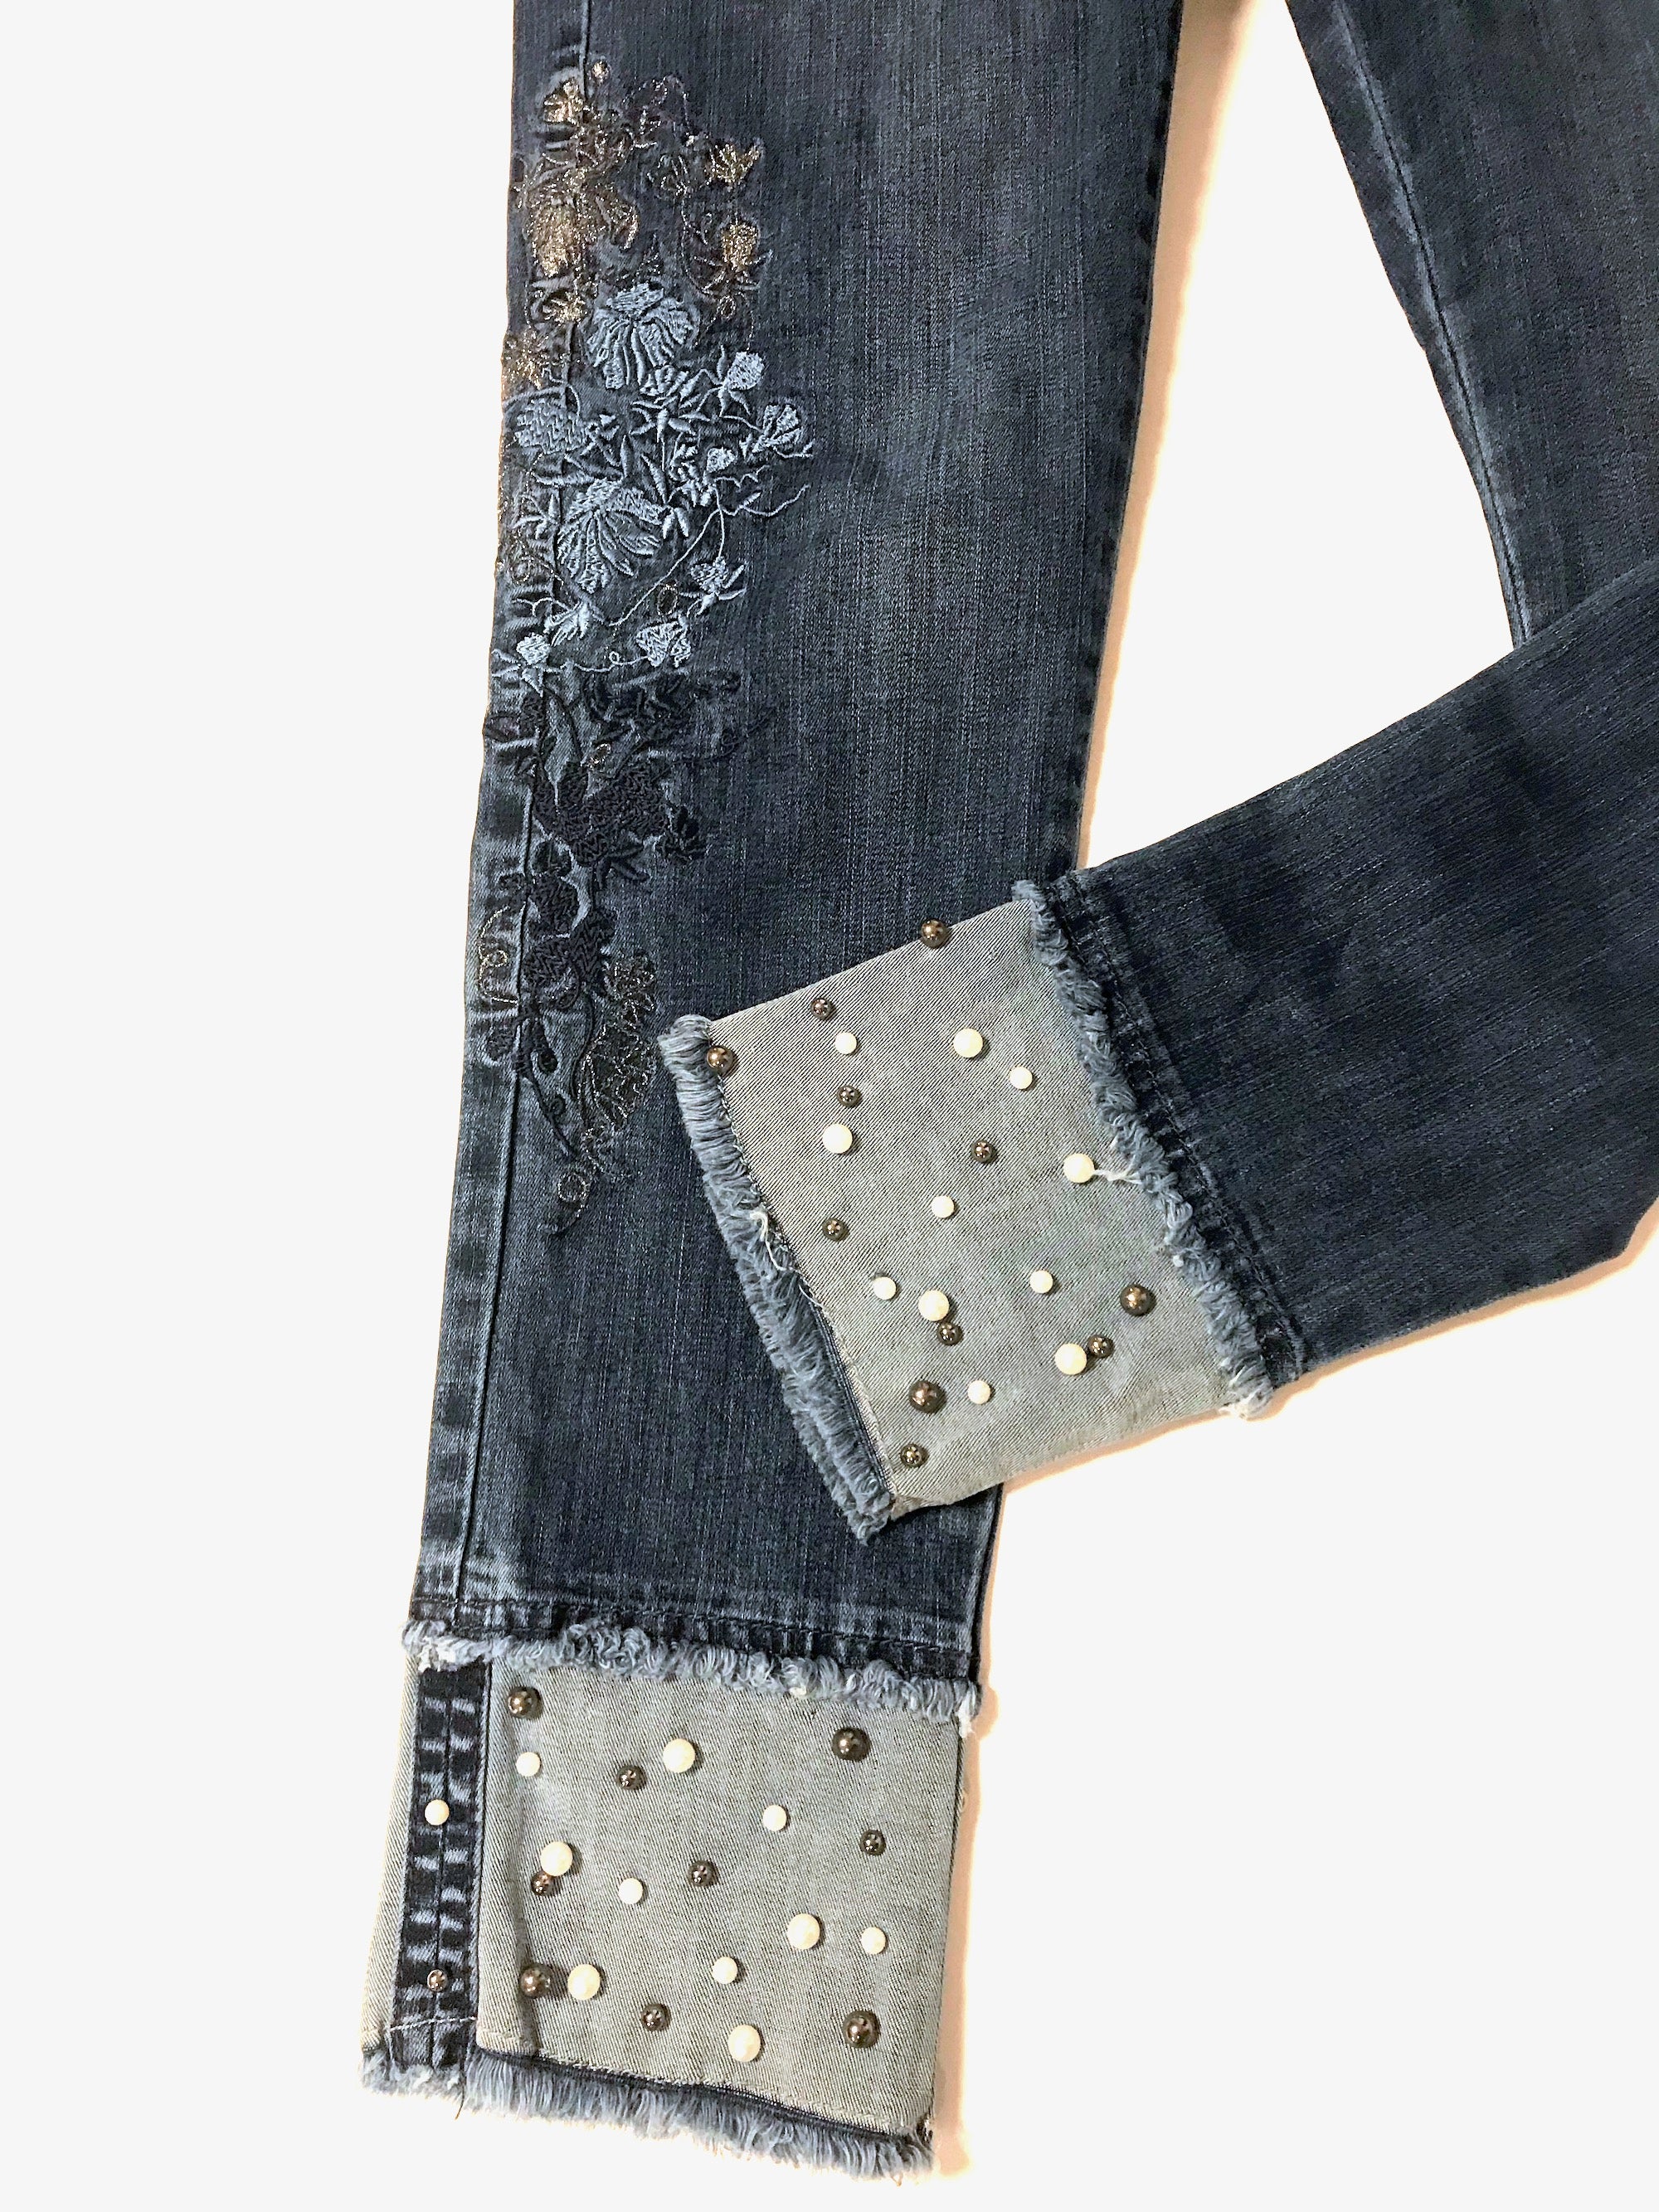 Embroidered Jean with Pearl cuff